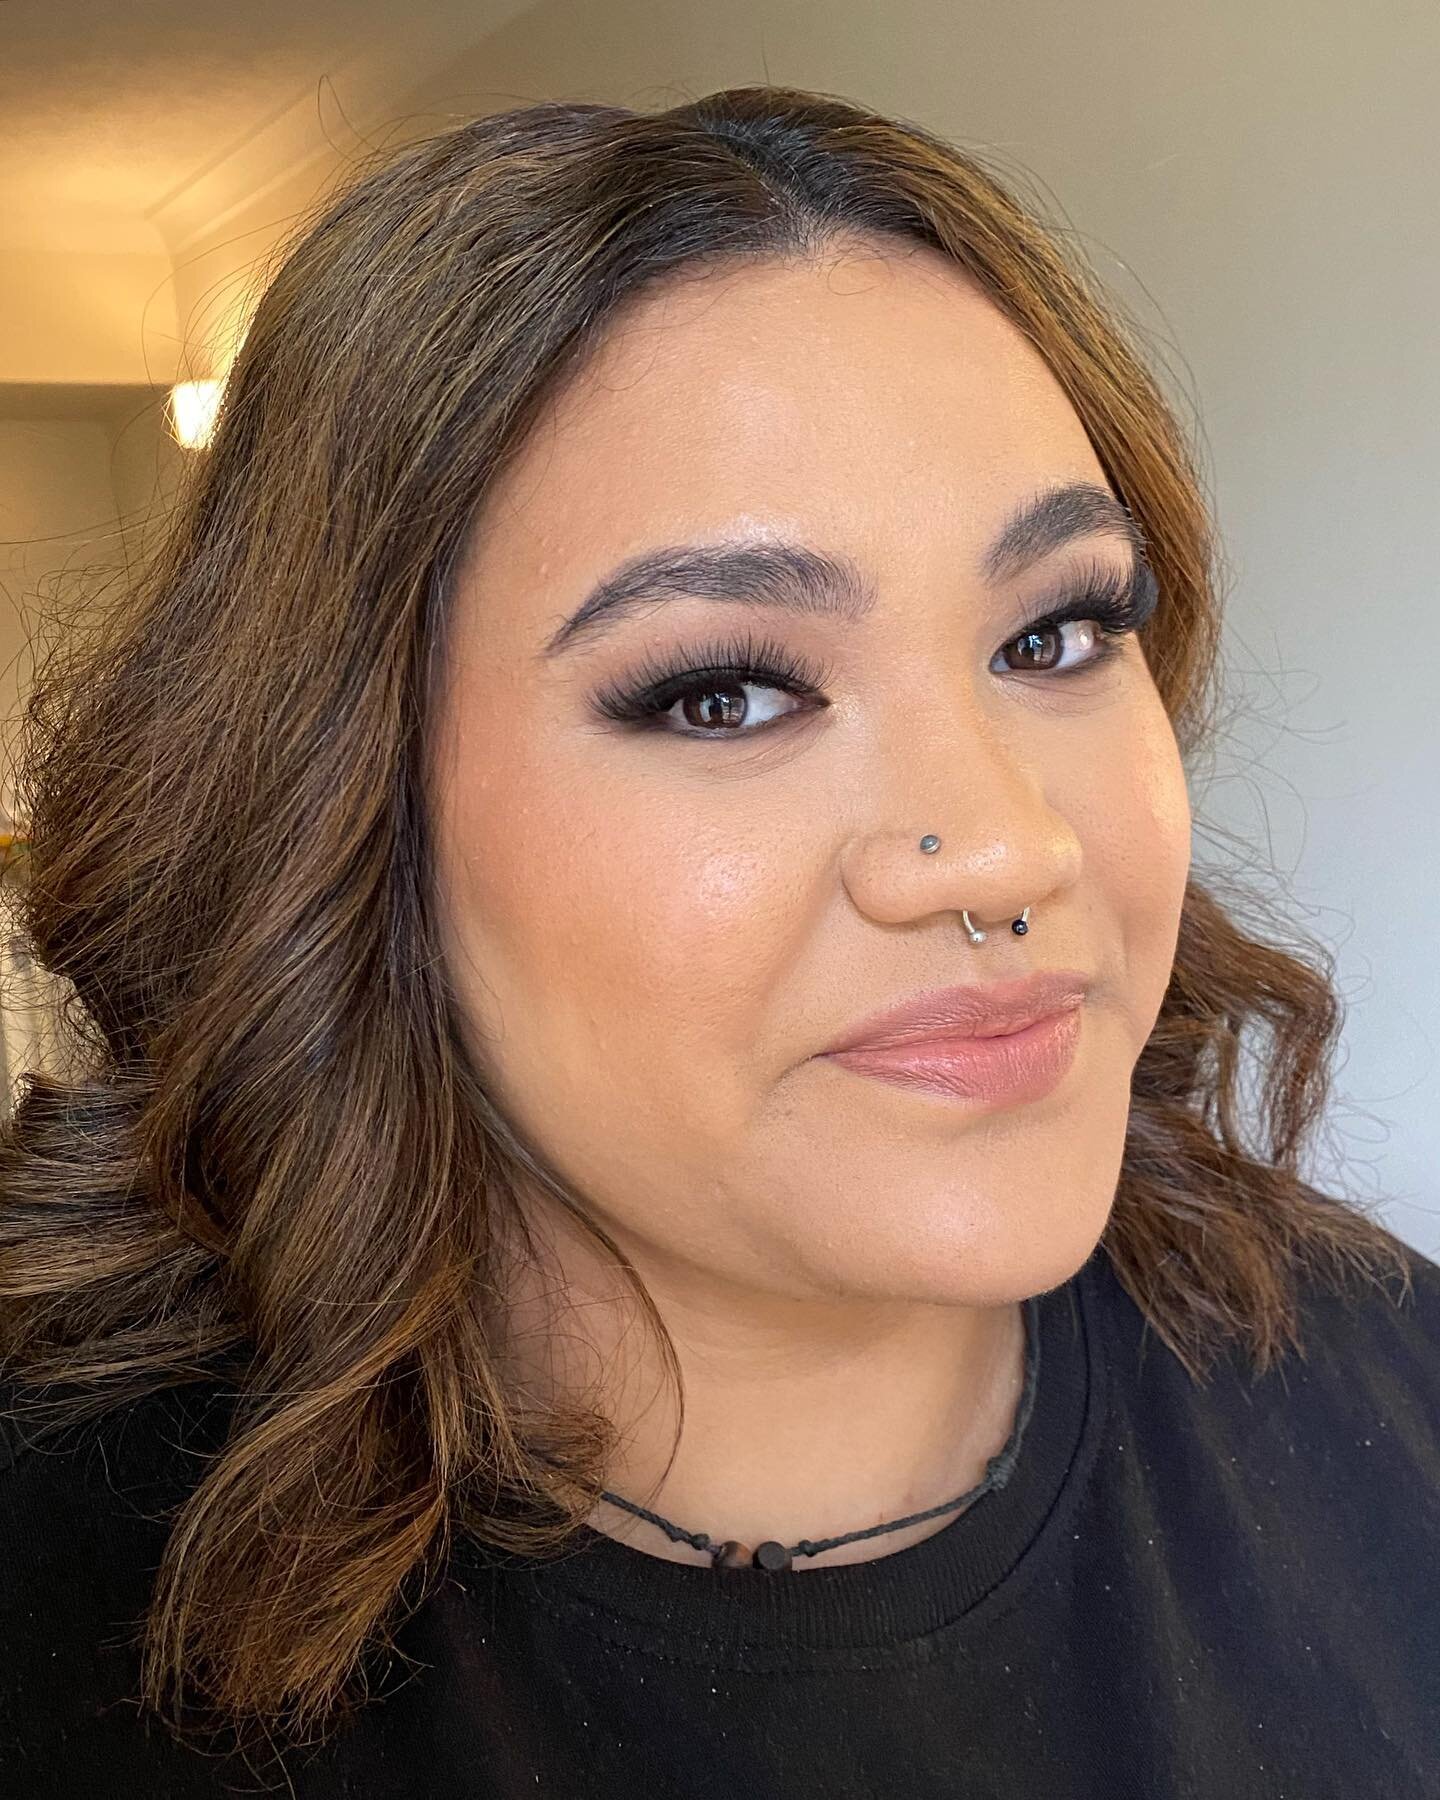 It&rsquo;s that giggle at the end of the video for me ✨&hearts;️ (swipe to the end to see) 

Punipuao had never worn eyeshadow on her bottom lash line, which I notice is common for a lot of you. She trusted me and ended up loving it! 

Eyeshadow on t